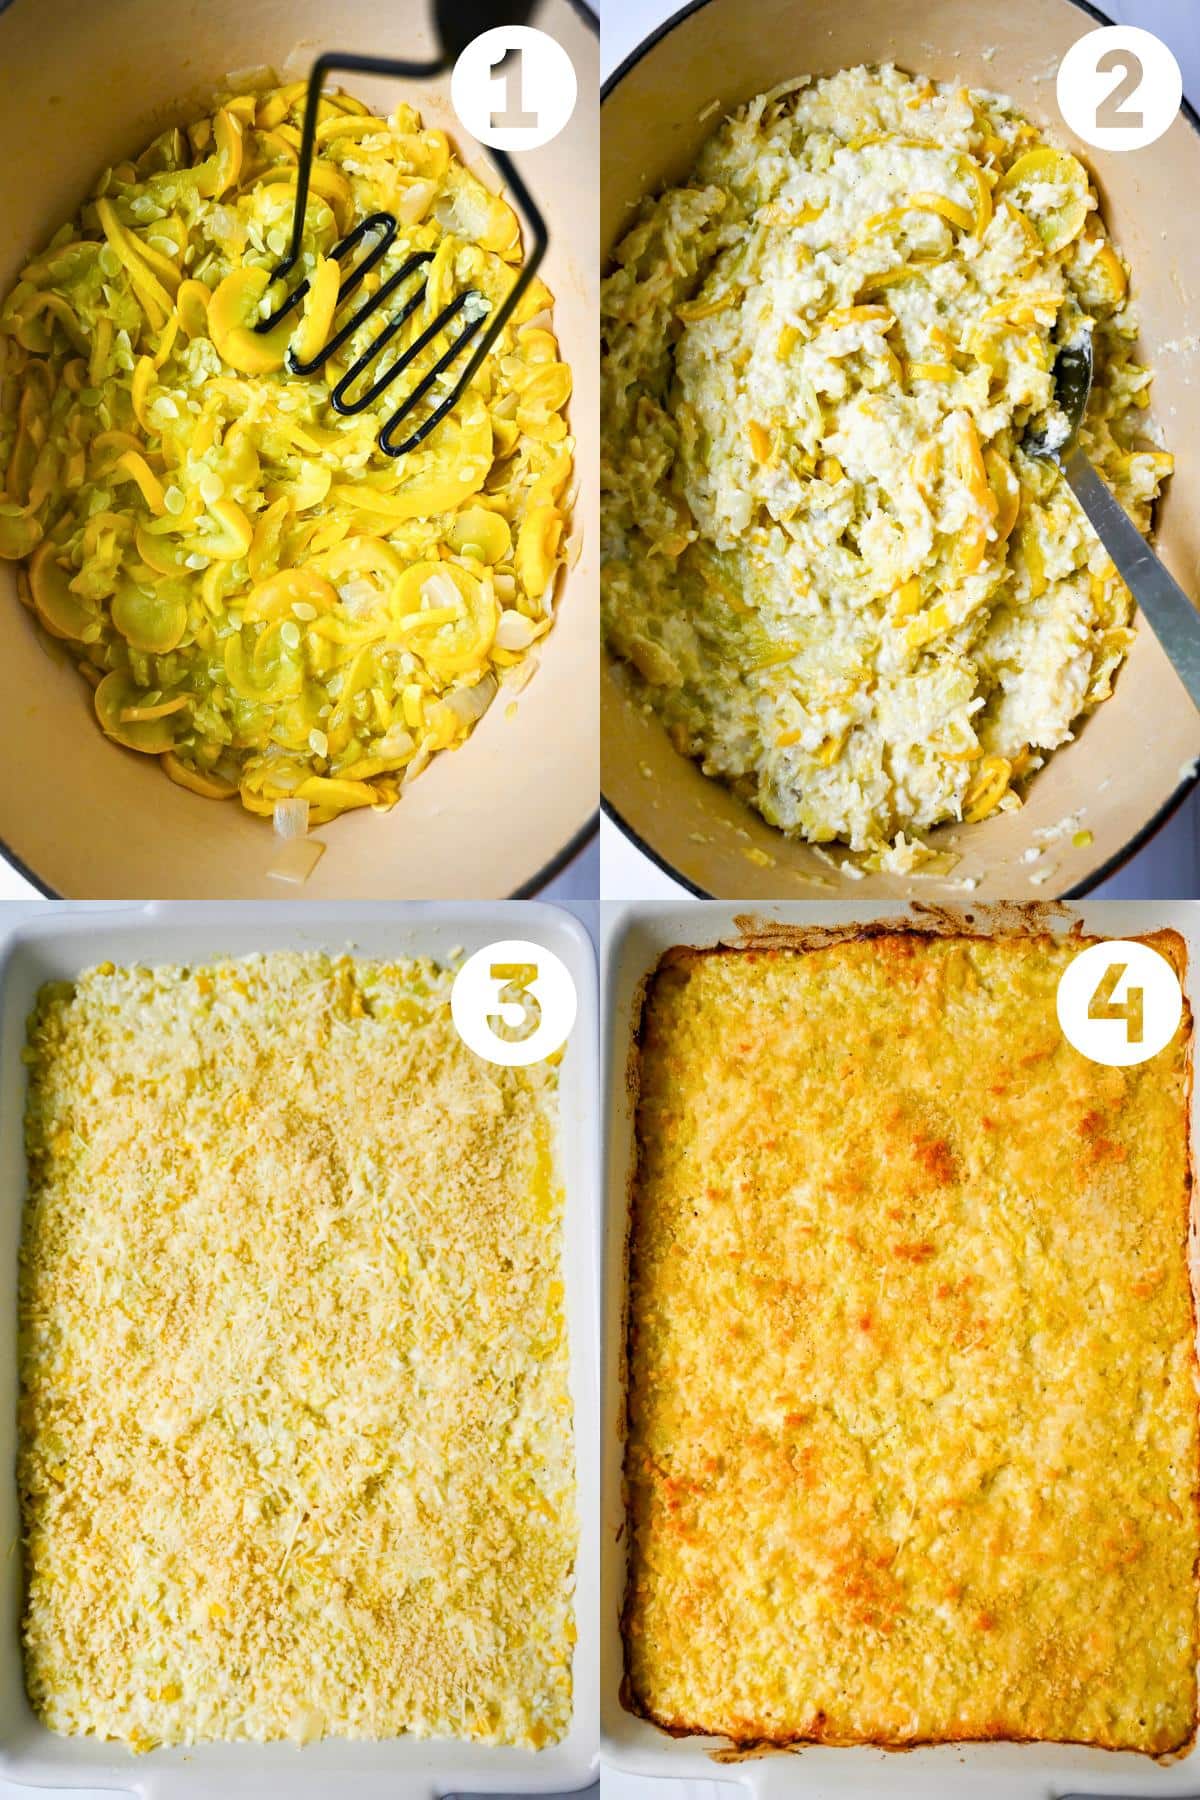 step photos for assembling keto squash casserole- mashing squash, stirring ingredients and assembled in dish